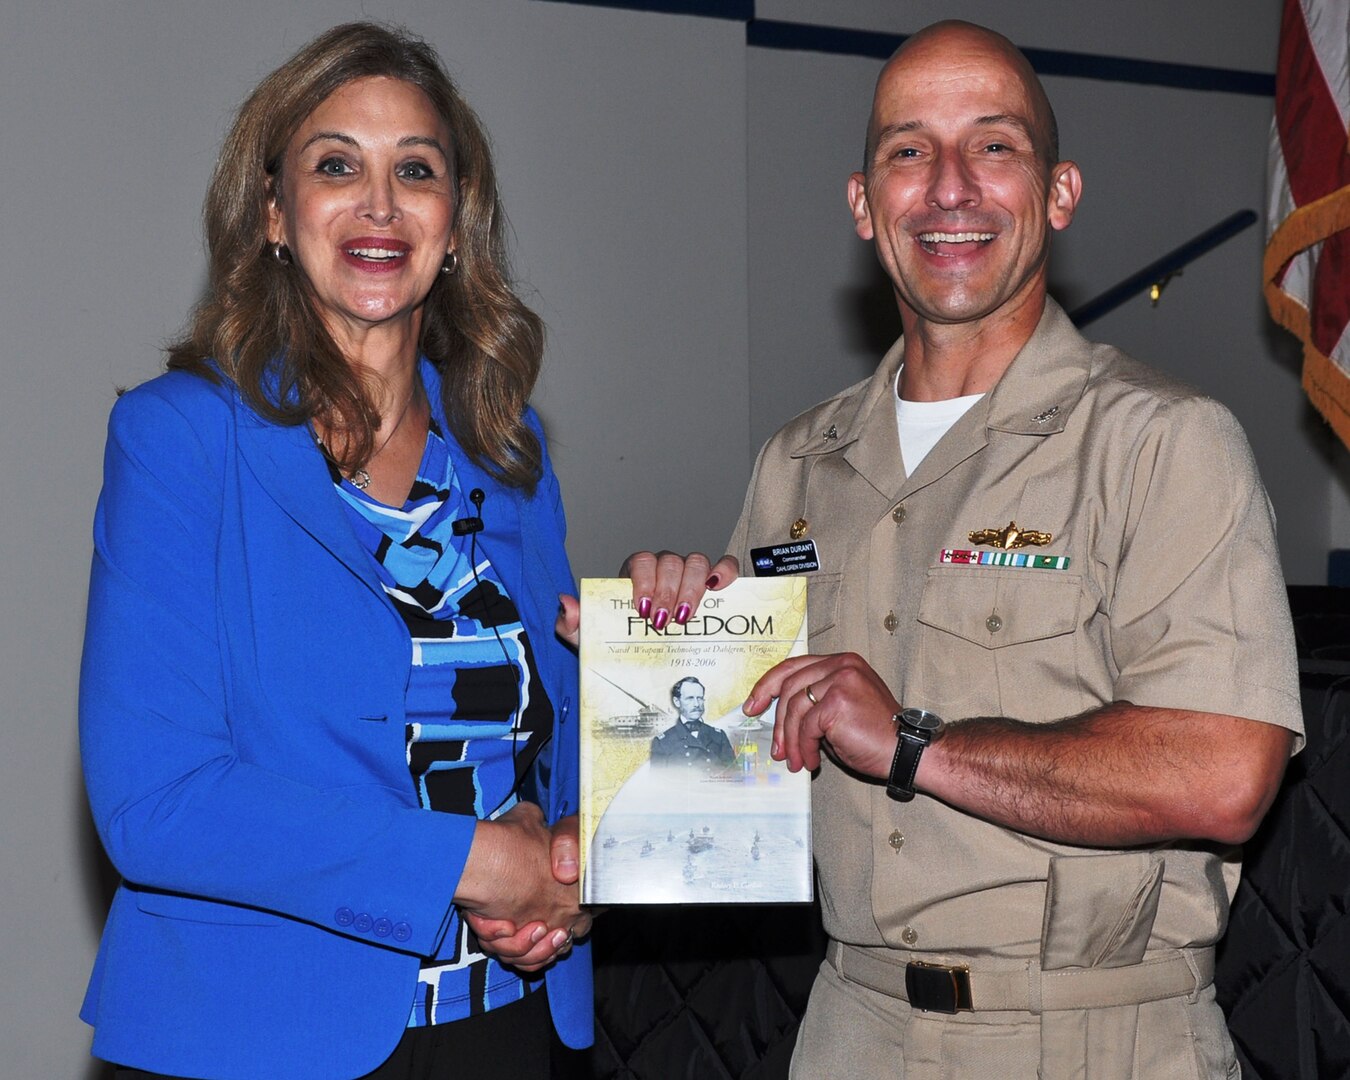 Capt. Brian Durant, right, commander of the Naval Surface Warfare Center Dahlgren Division (NSWCDD), presents "The Sound of Freedom" to Amanda Simpson, left, executive director of the Army Office of Energy Initiatives, after her presentation at the LGBT Pride Month Observance at Naval Support Facility (NSF) Dahlgren on July 24. 